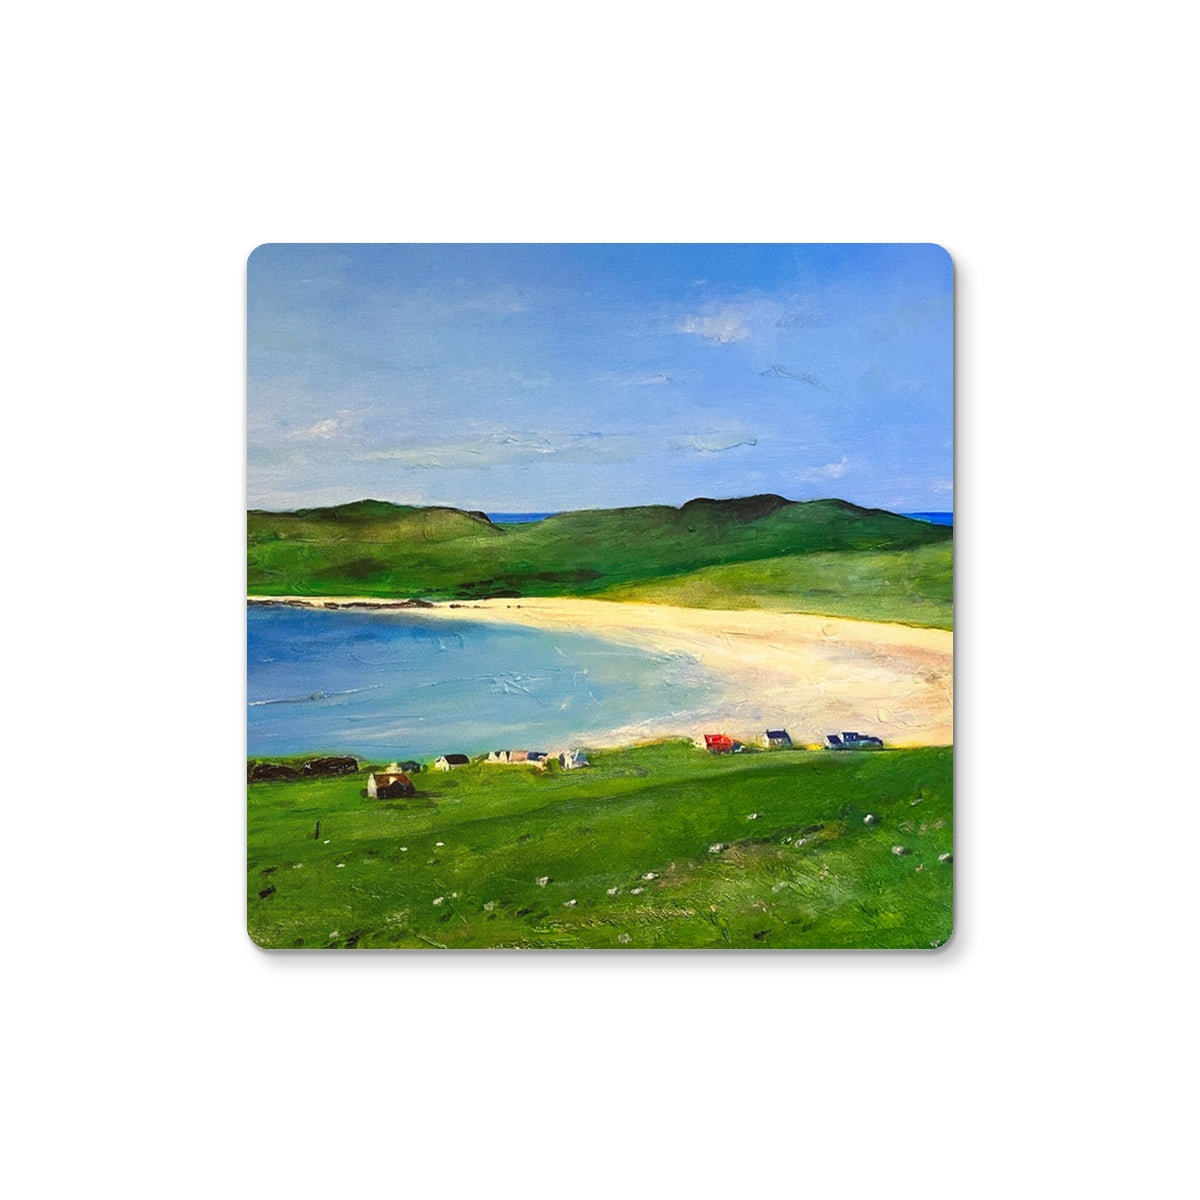 Balephuil Beach Tiree Art Gifts Coaster-Coasters-Hebridean Islands Art Gallery-Single Coaster-Paintings, Prints, Homeware, Art Gifts From Scotland By Scottish Artist Kevin Hunter